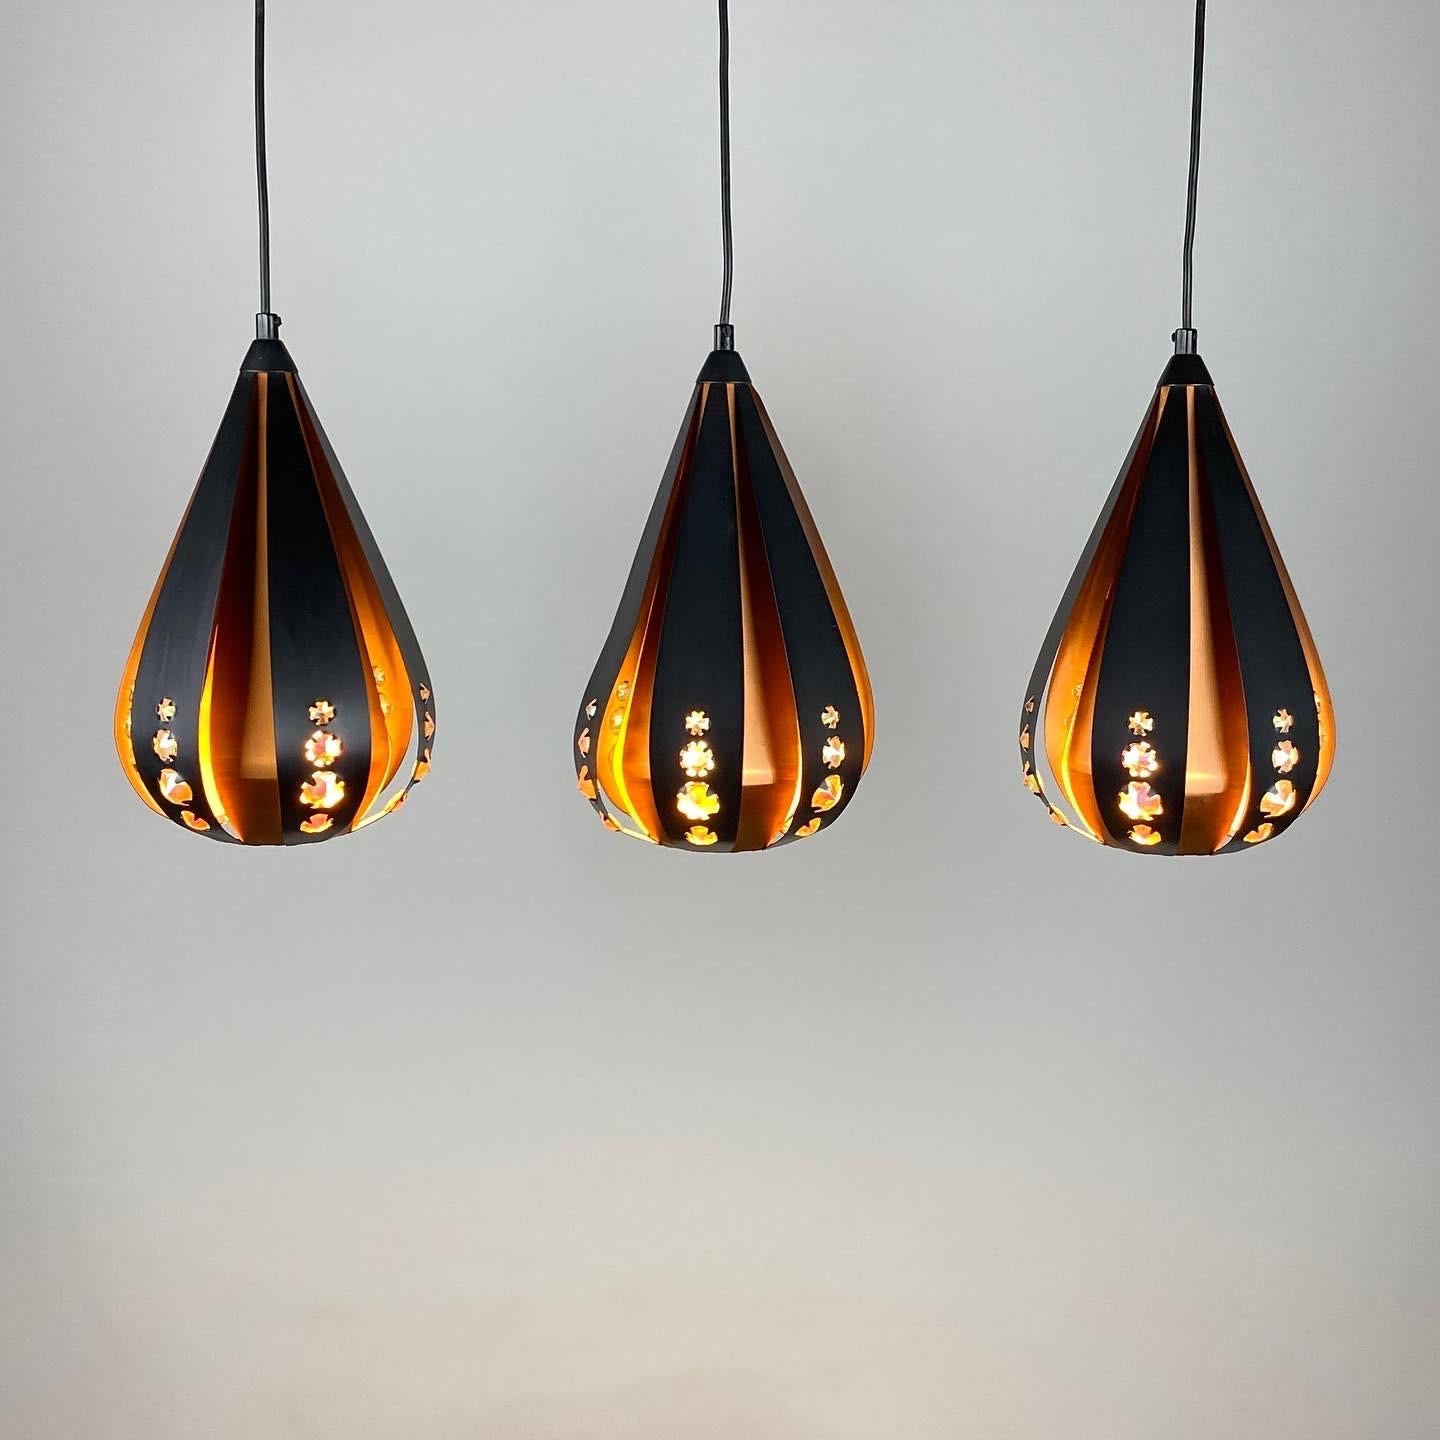 Set of three beautiful droplet shaped pendant lights by Werner Schou for Coronell Electrical Denmark produced around 1960 - 1970. 

Made from copper, black metal slats and rectangular cut glass pieces. Lamp with warm atmospheric